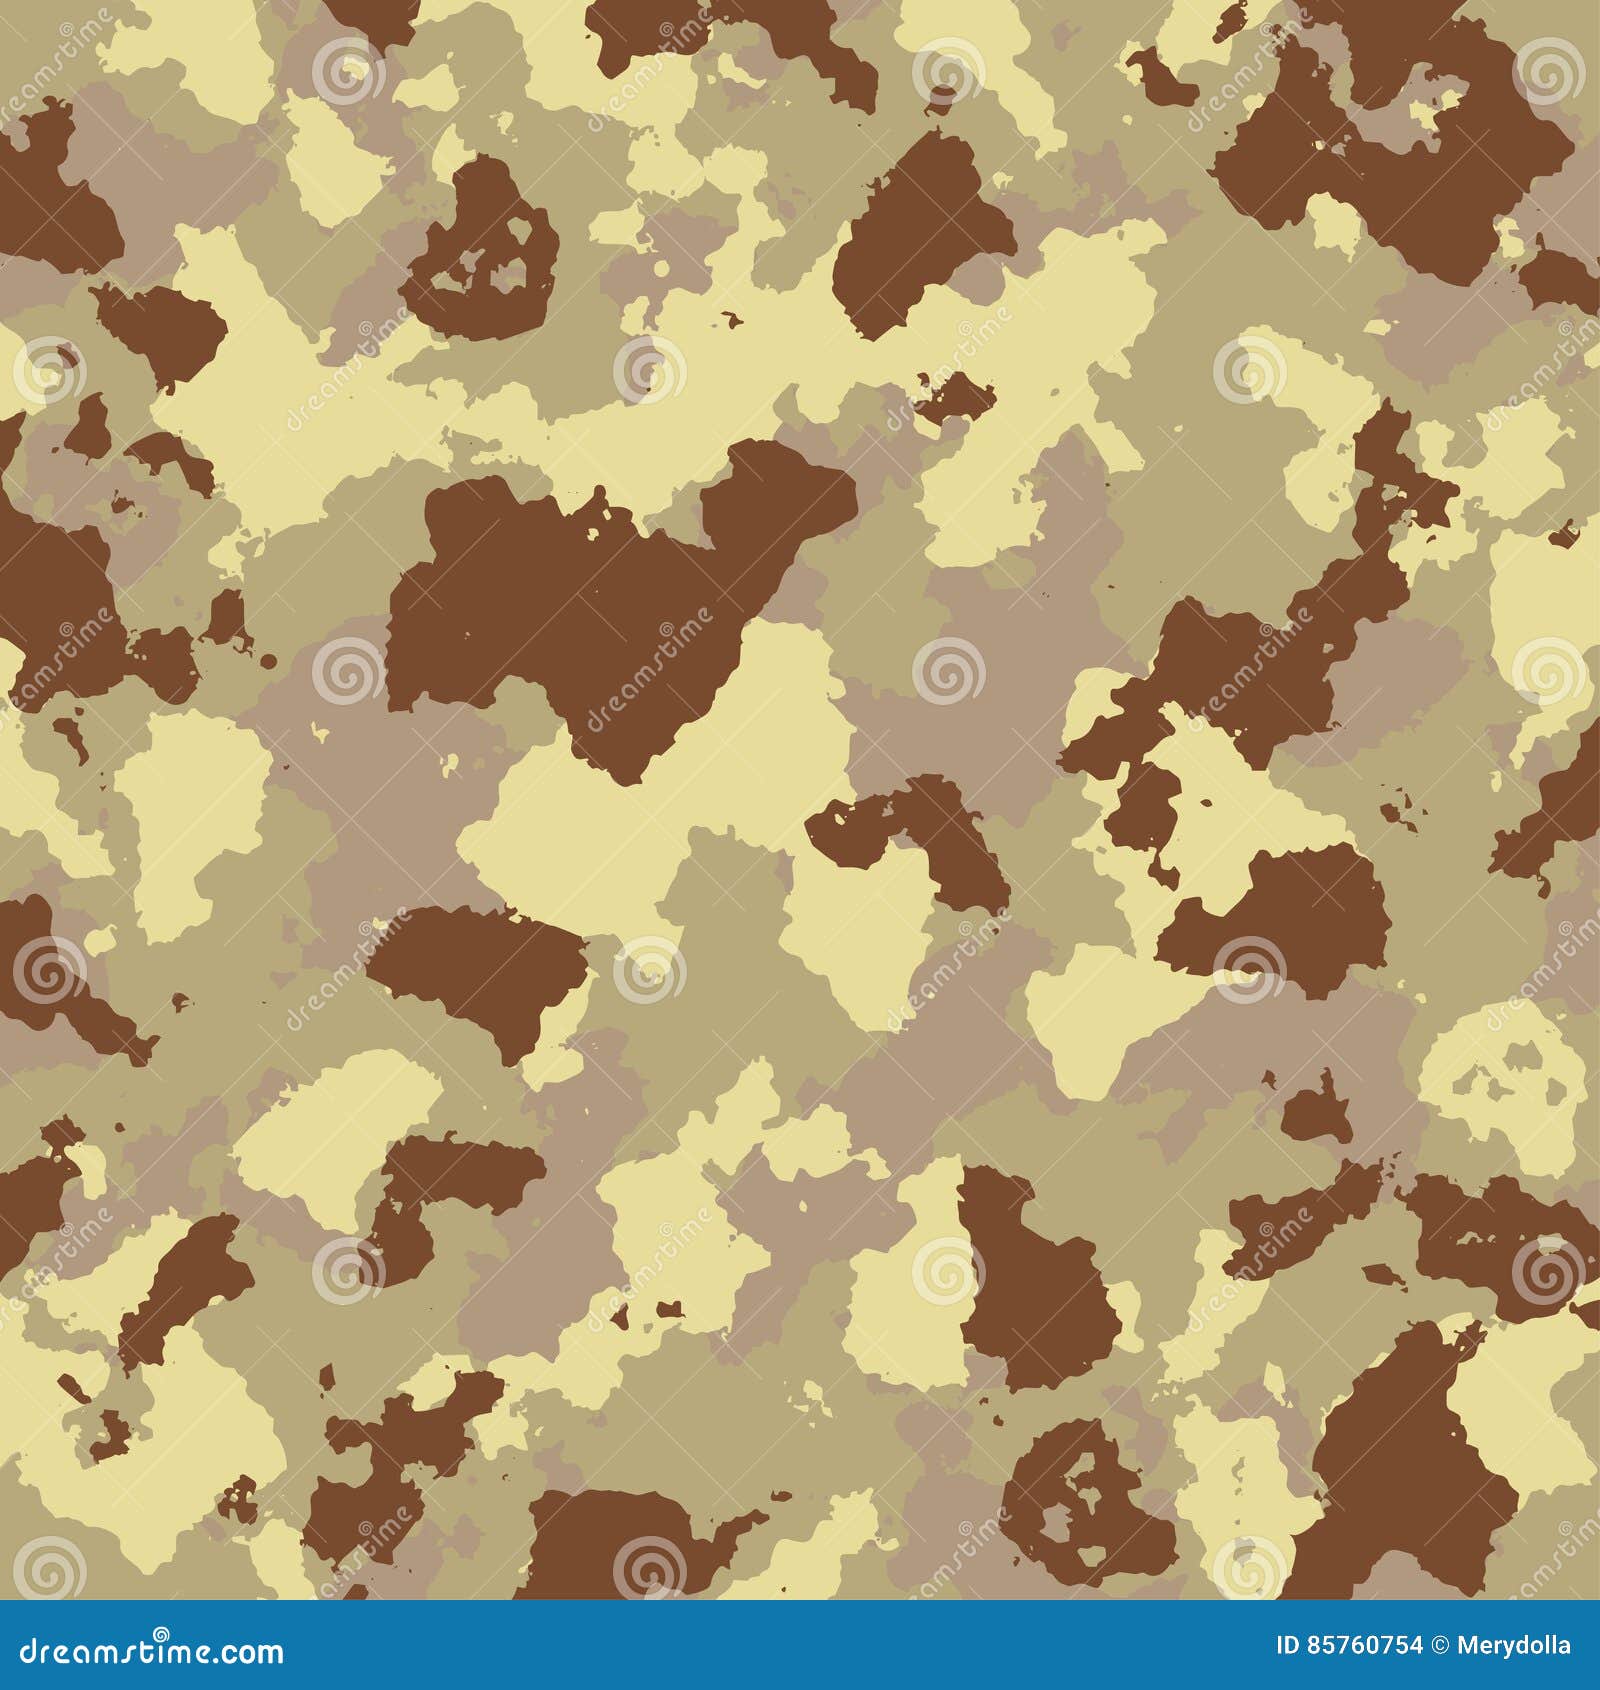 Vector Military Camouflage Pattern in Brown Colors Stock Vector ...